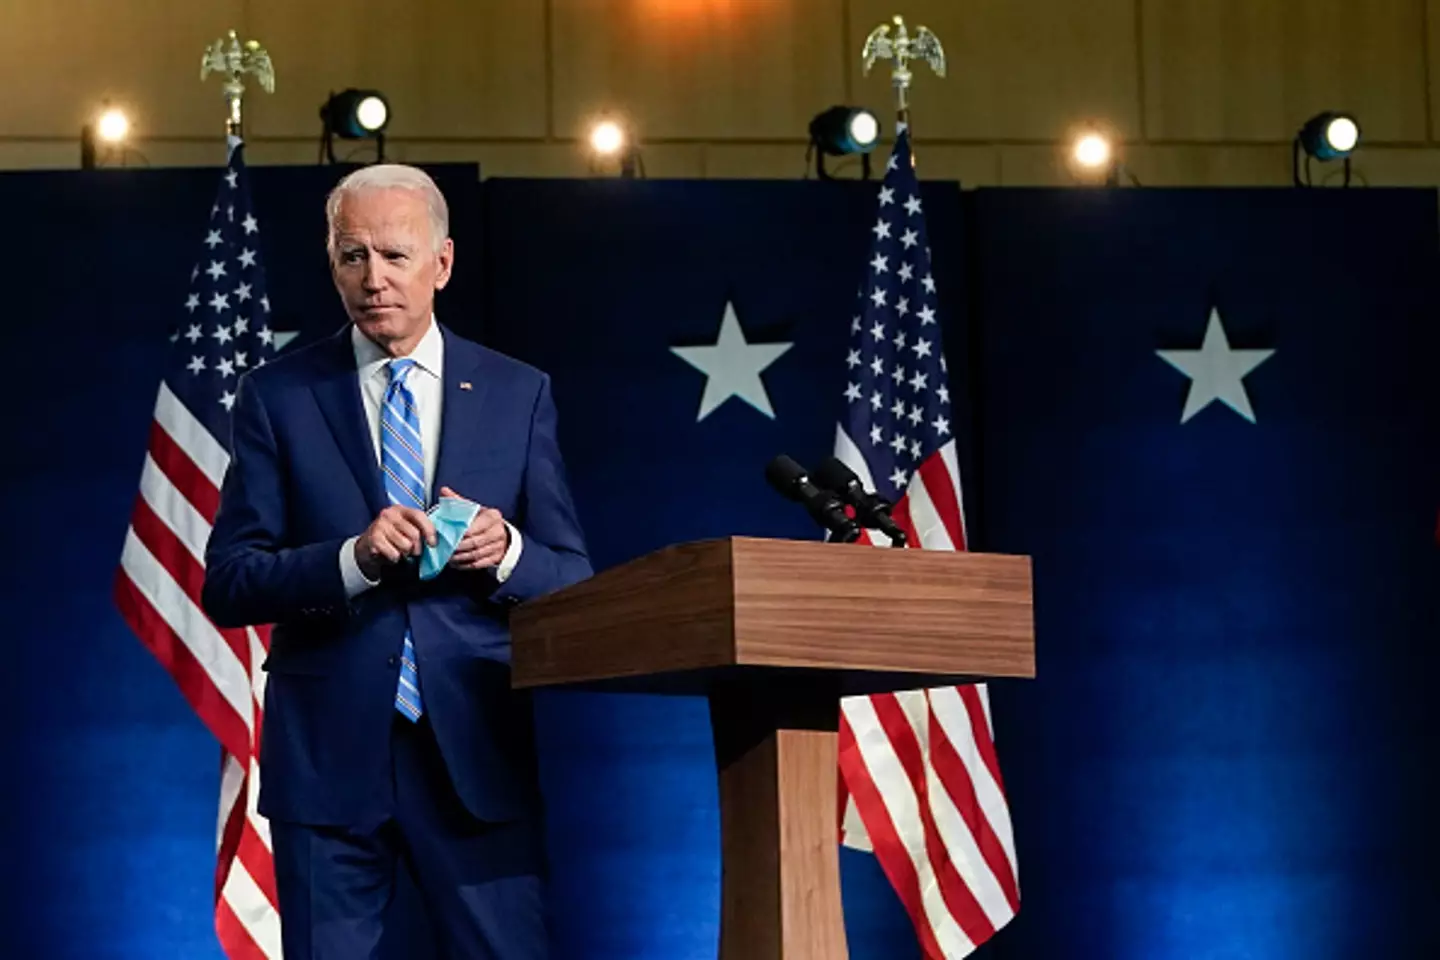 Biden initially suggested he'd be a 'transition' President.